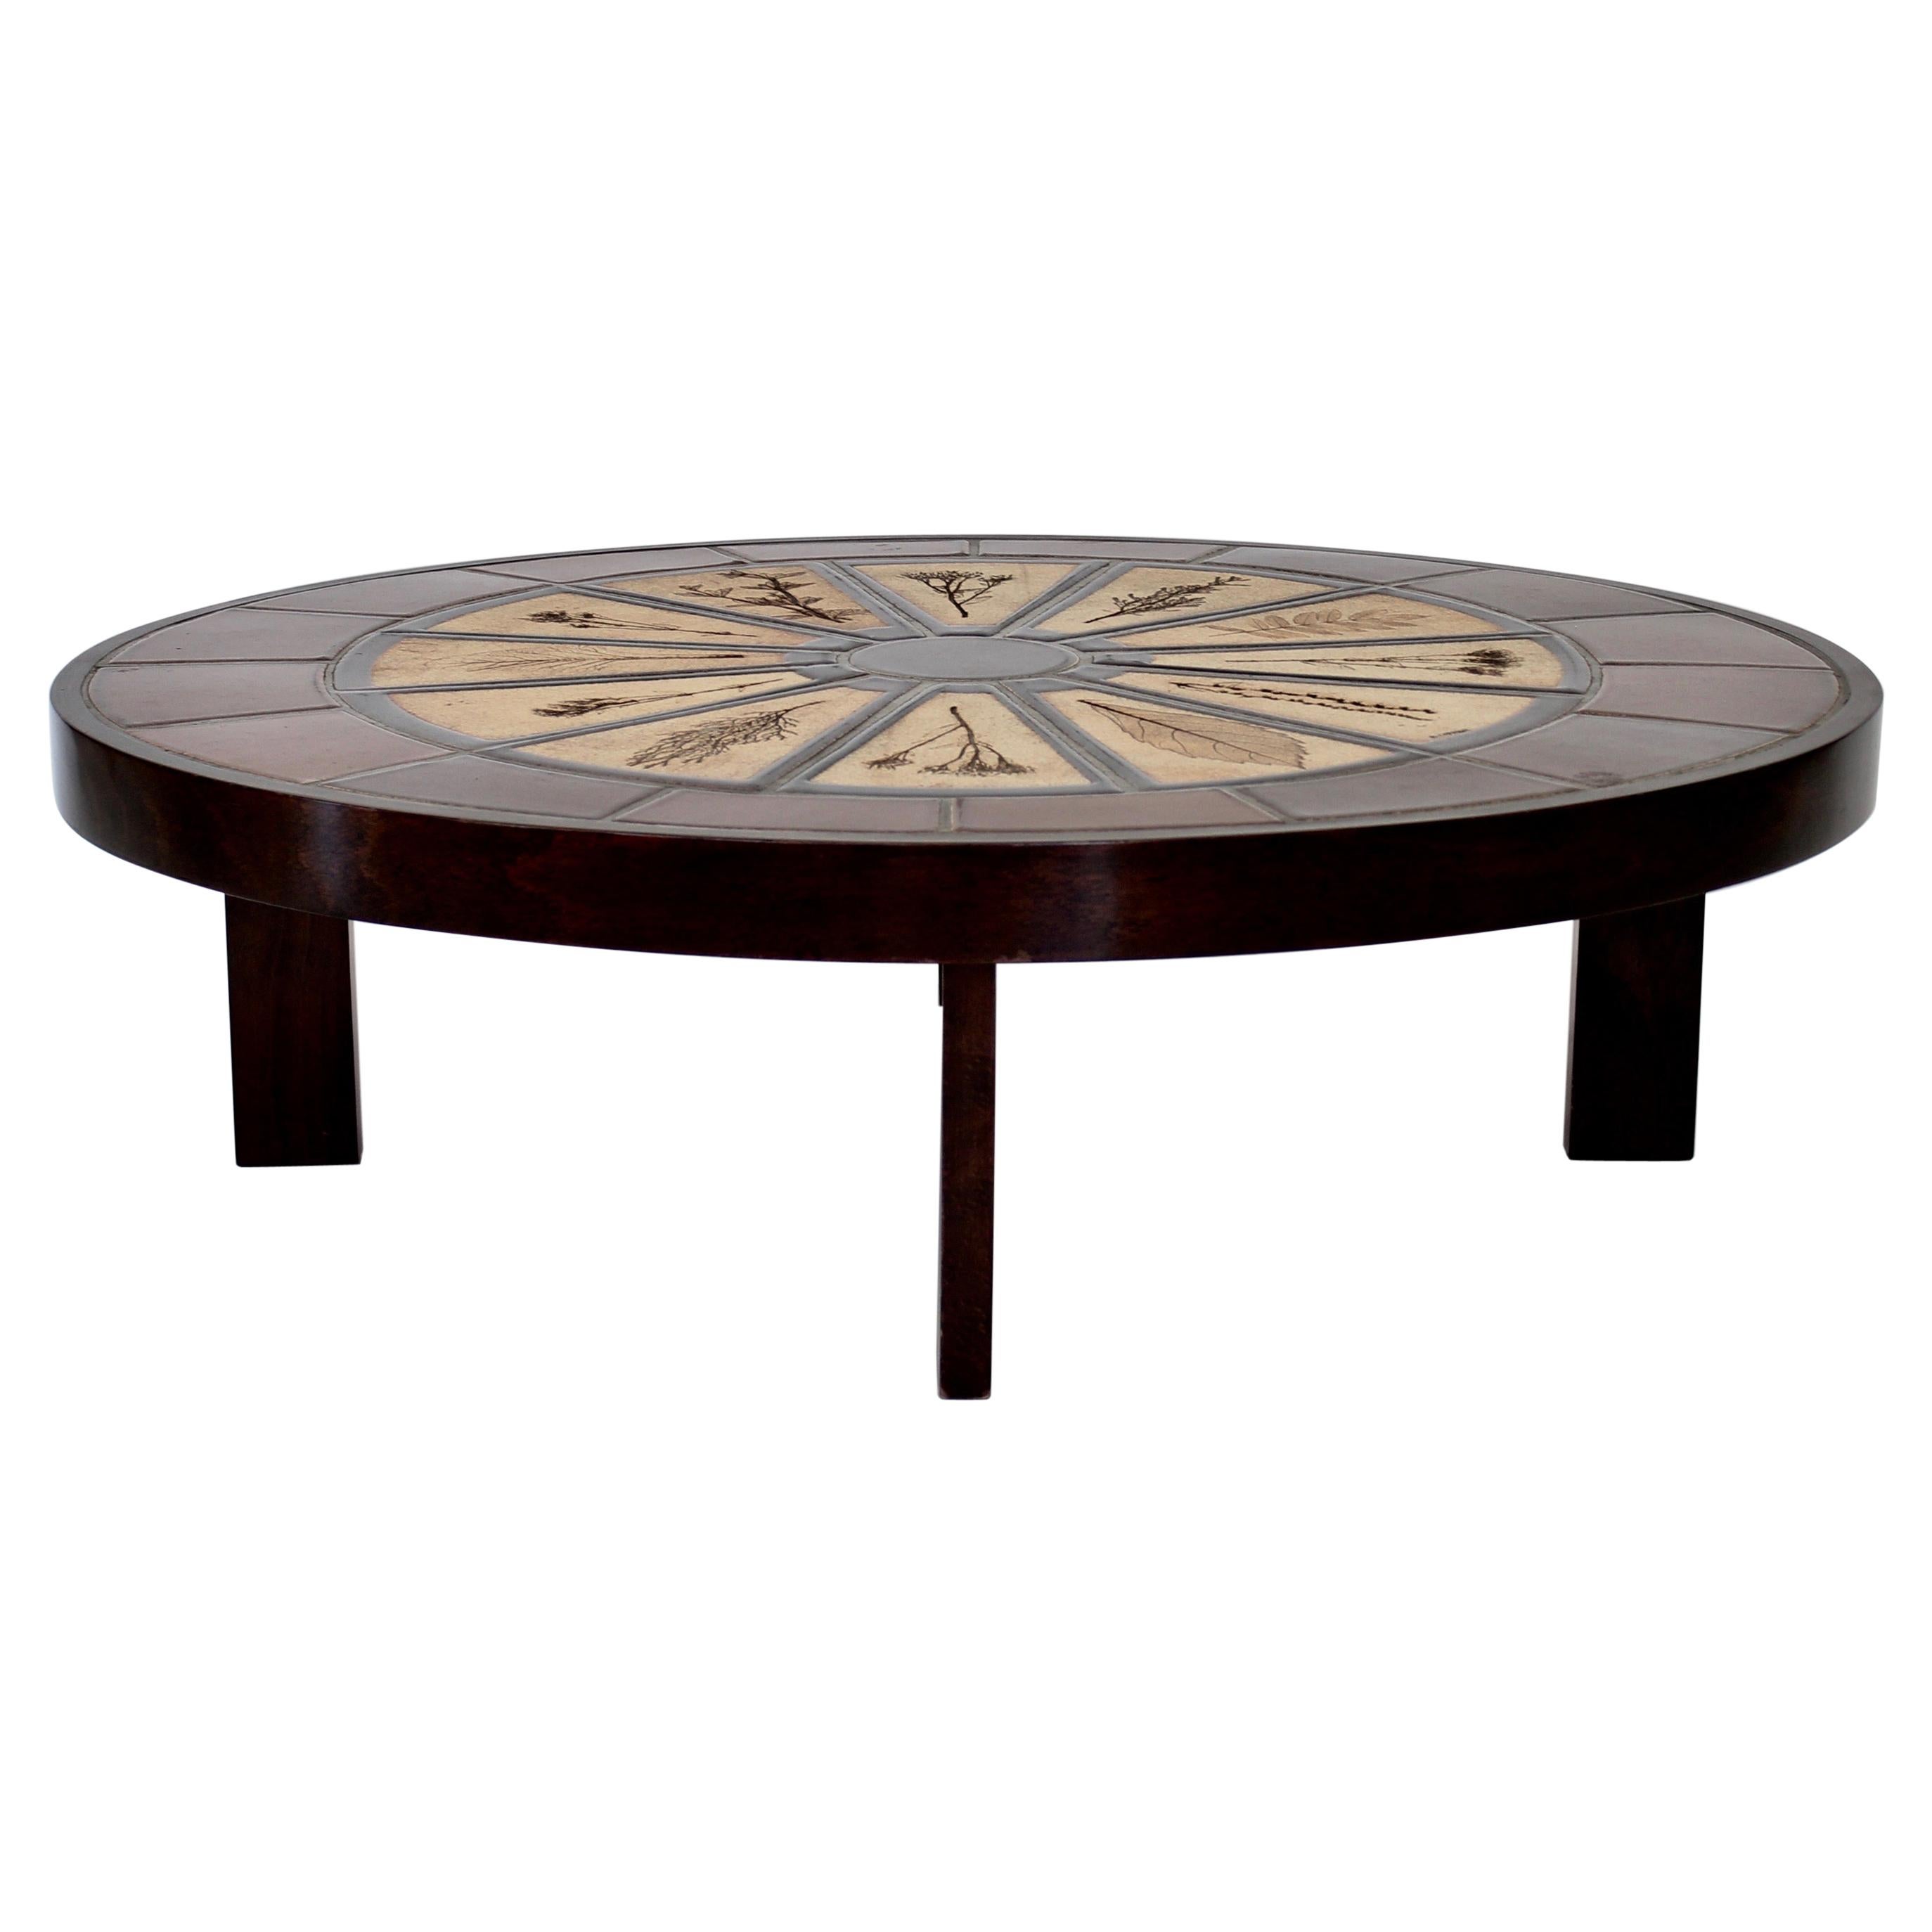 Roger Capron French Ceramic Round Coffee Table with Leaf Decorations